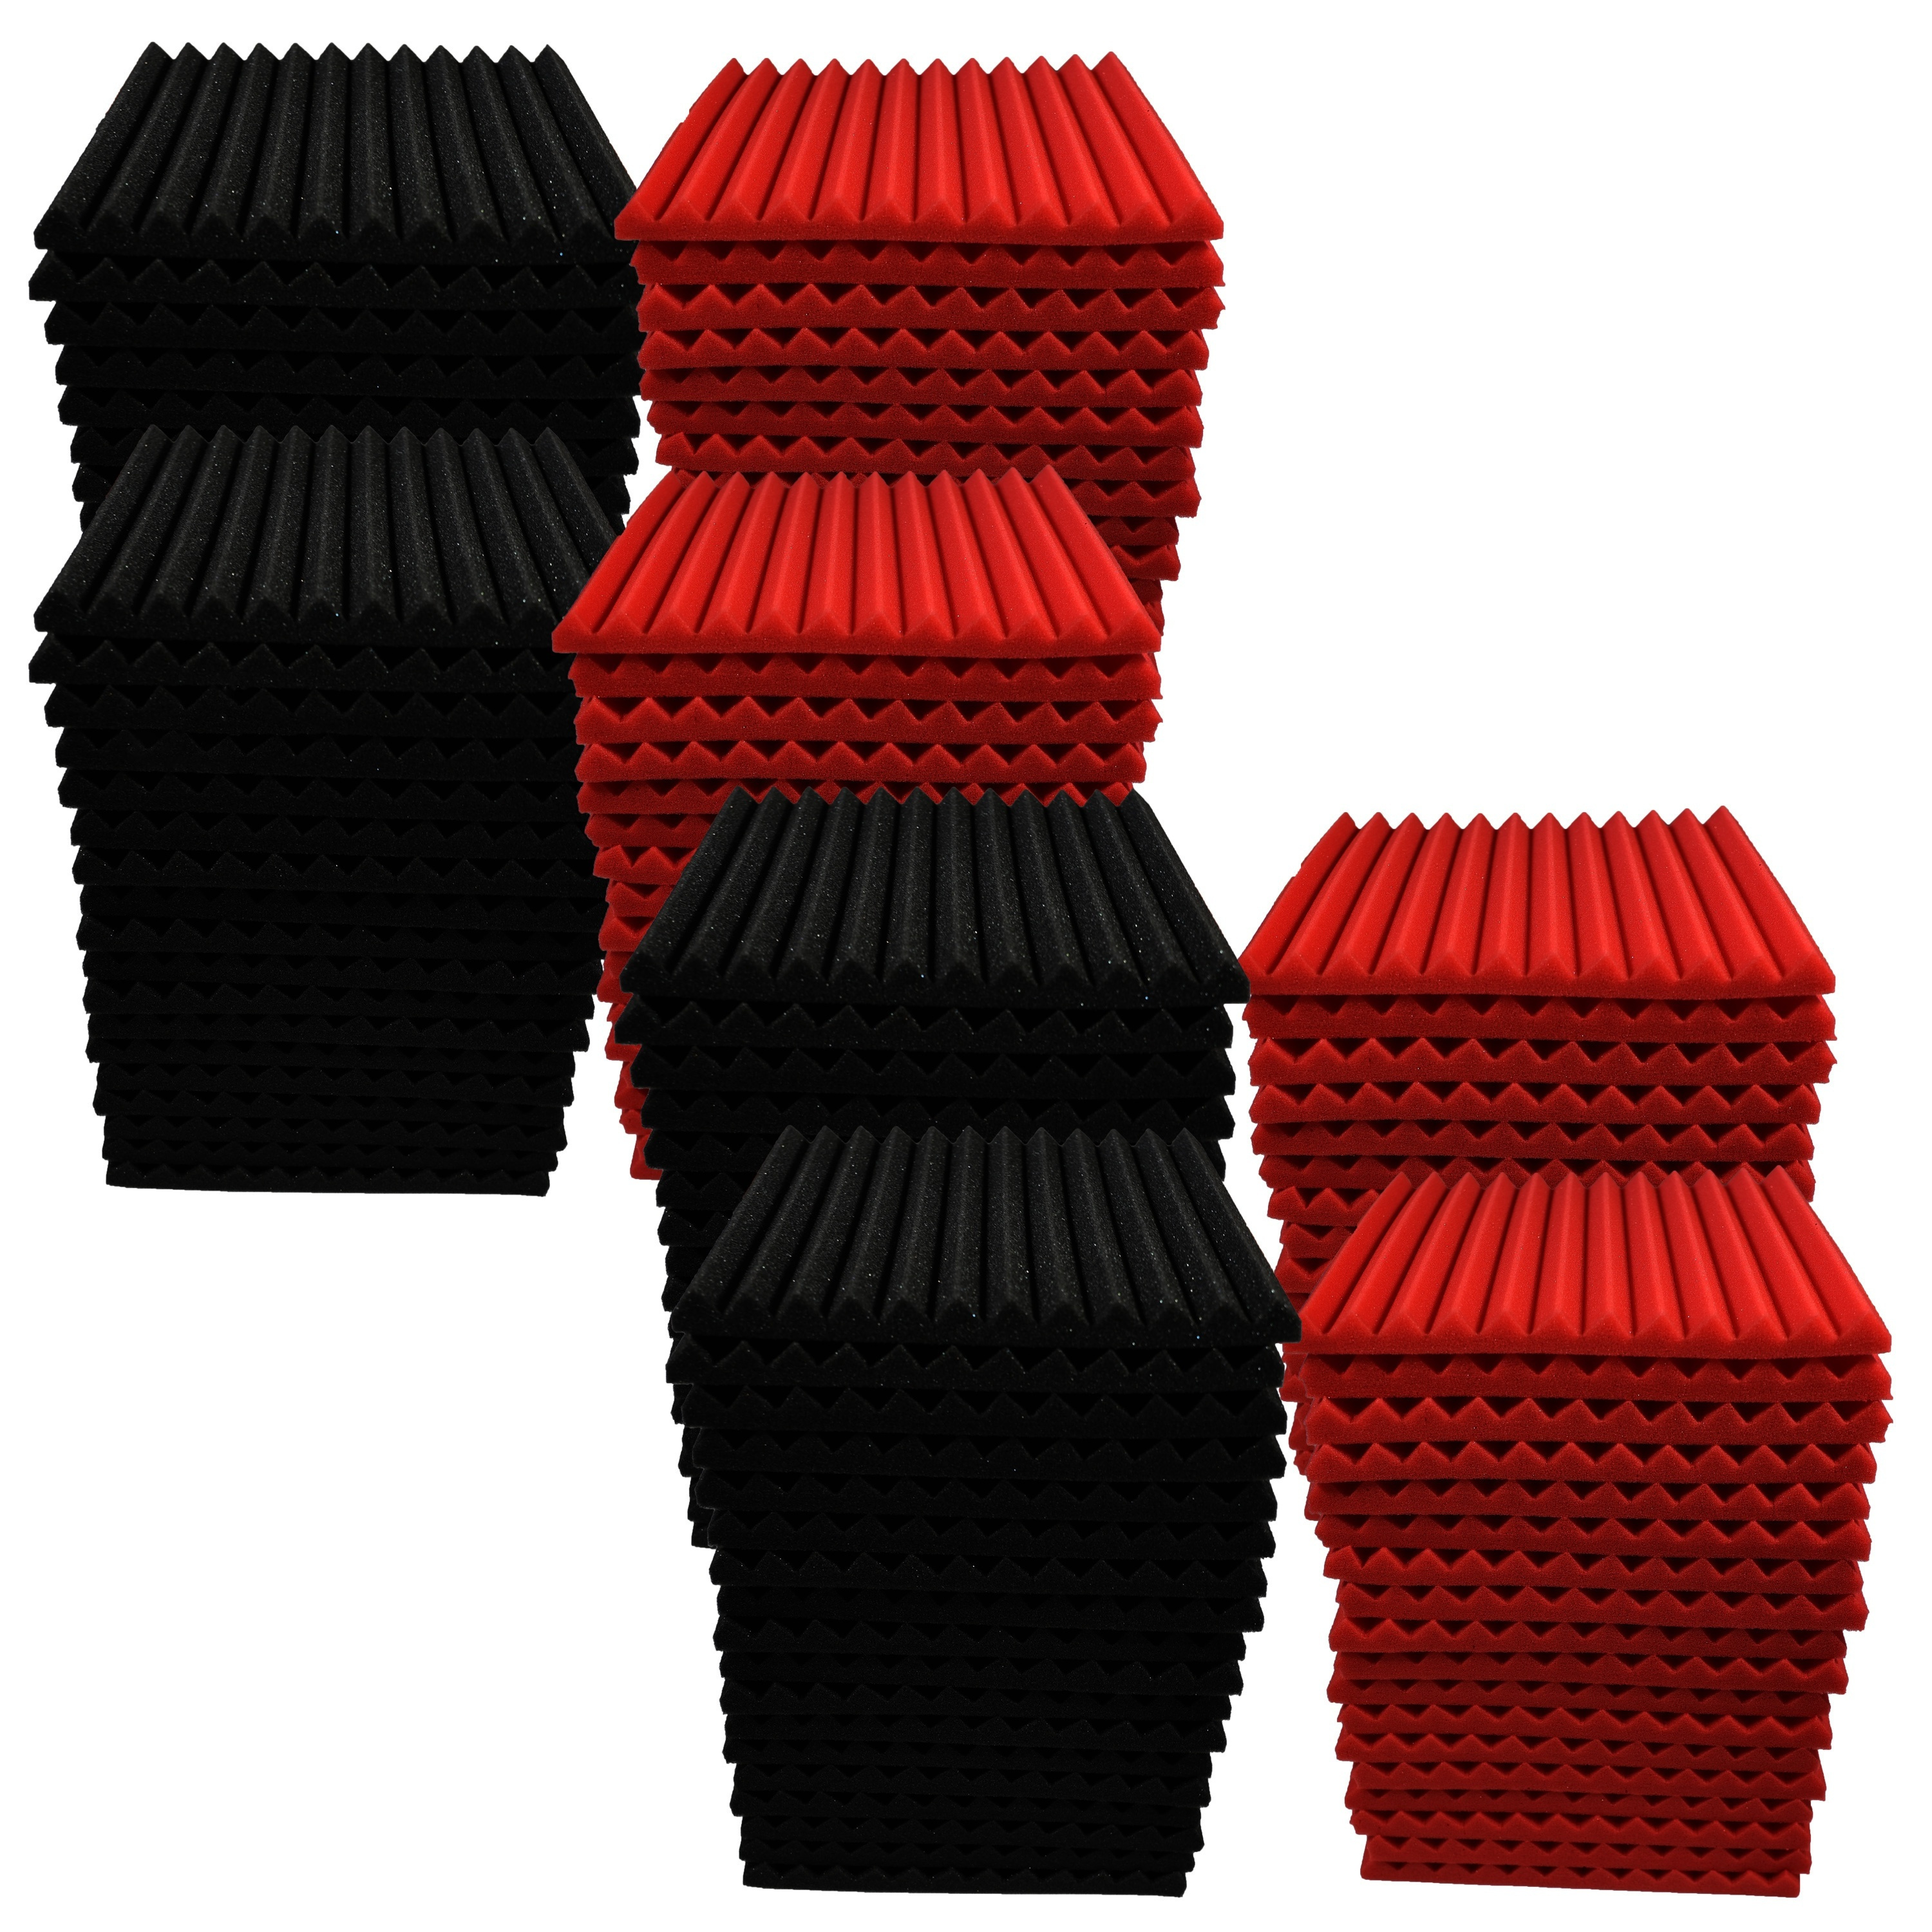 

96pcs Acoustic Foam Panels, Black And Red Contemporary Style Soundproofing Studio Wedge Tiles, Sound Absorbing Wall Panels For Music Instruments & Recording Studios, Made Of Polyurethane, 30*30*2.5cm